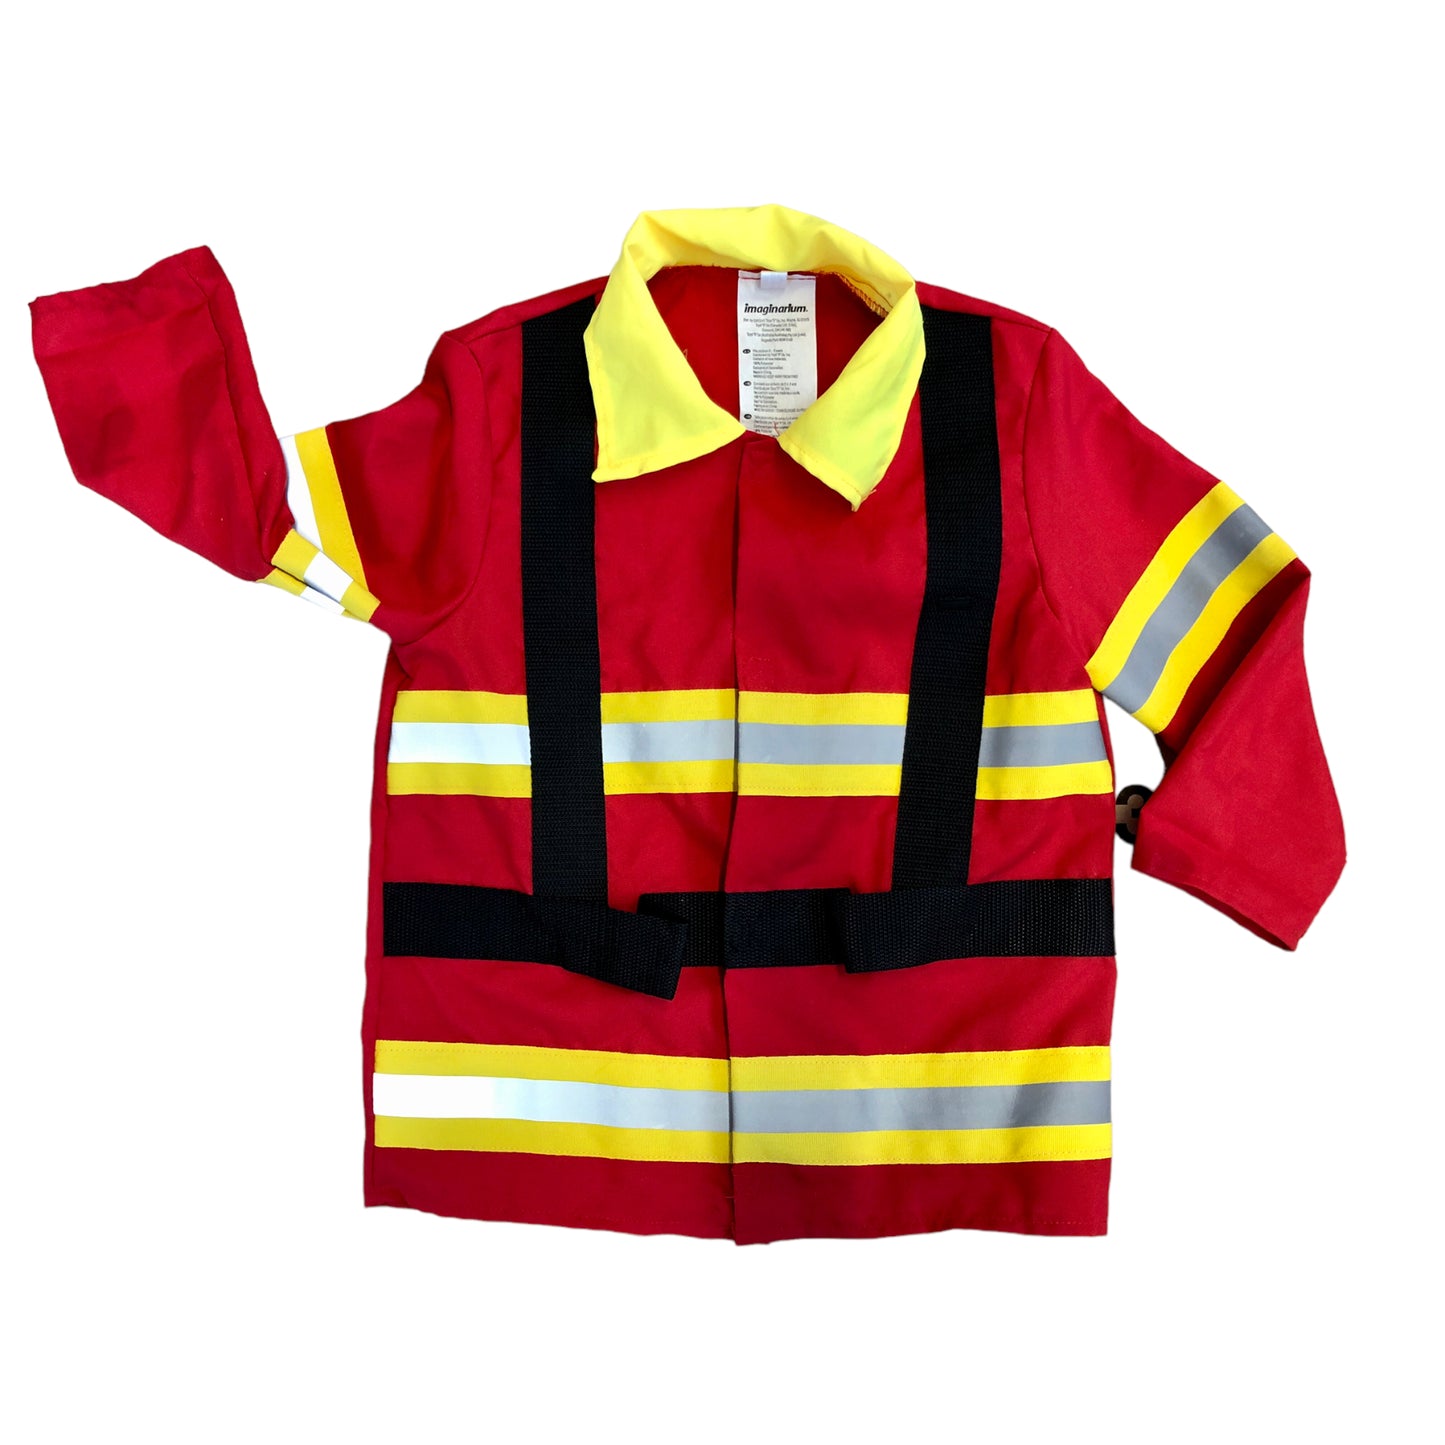 Firefighter coat (3/6 years old)